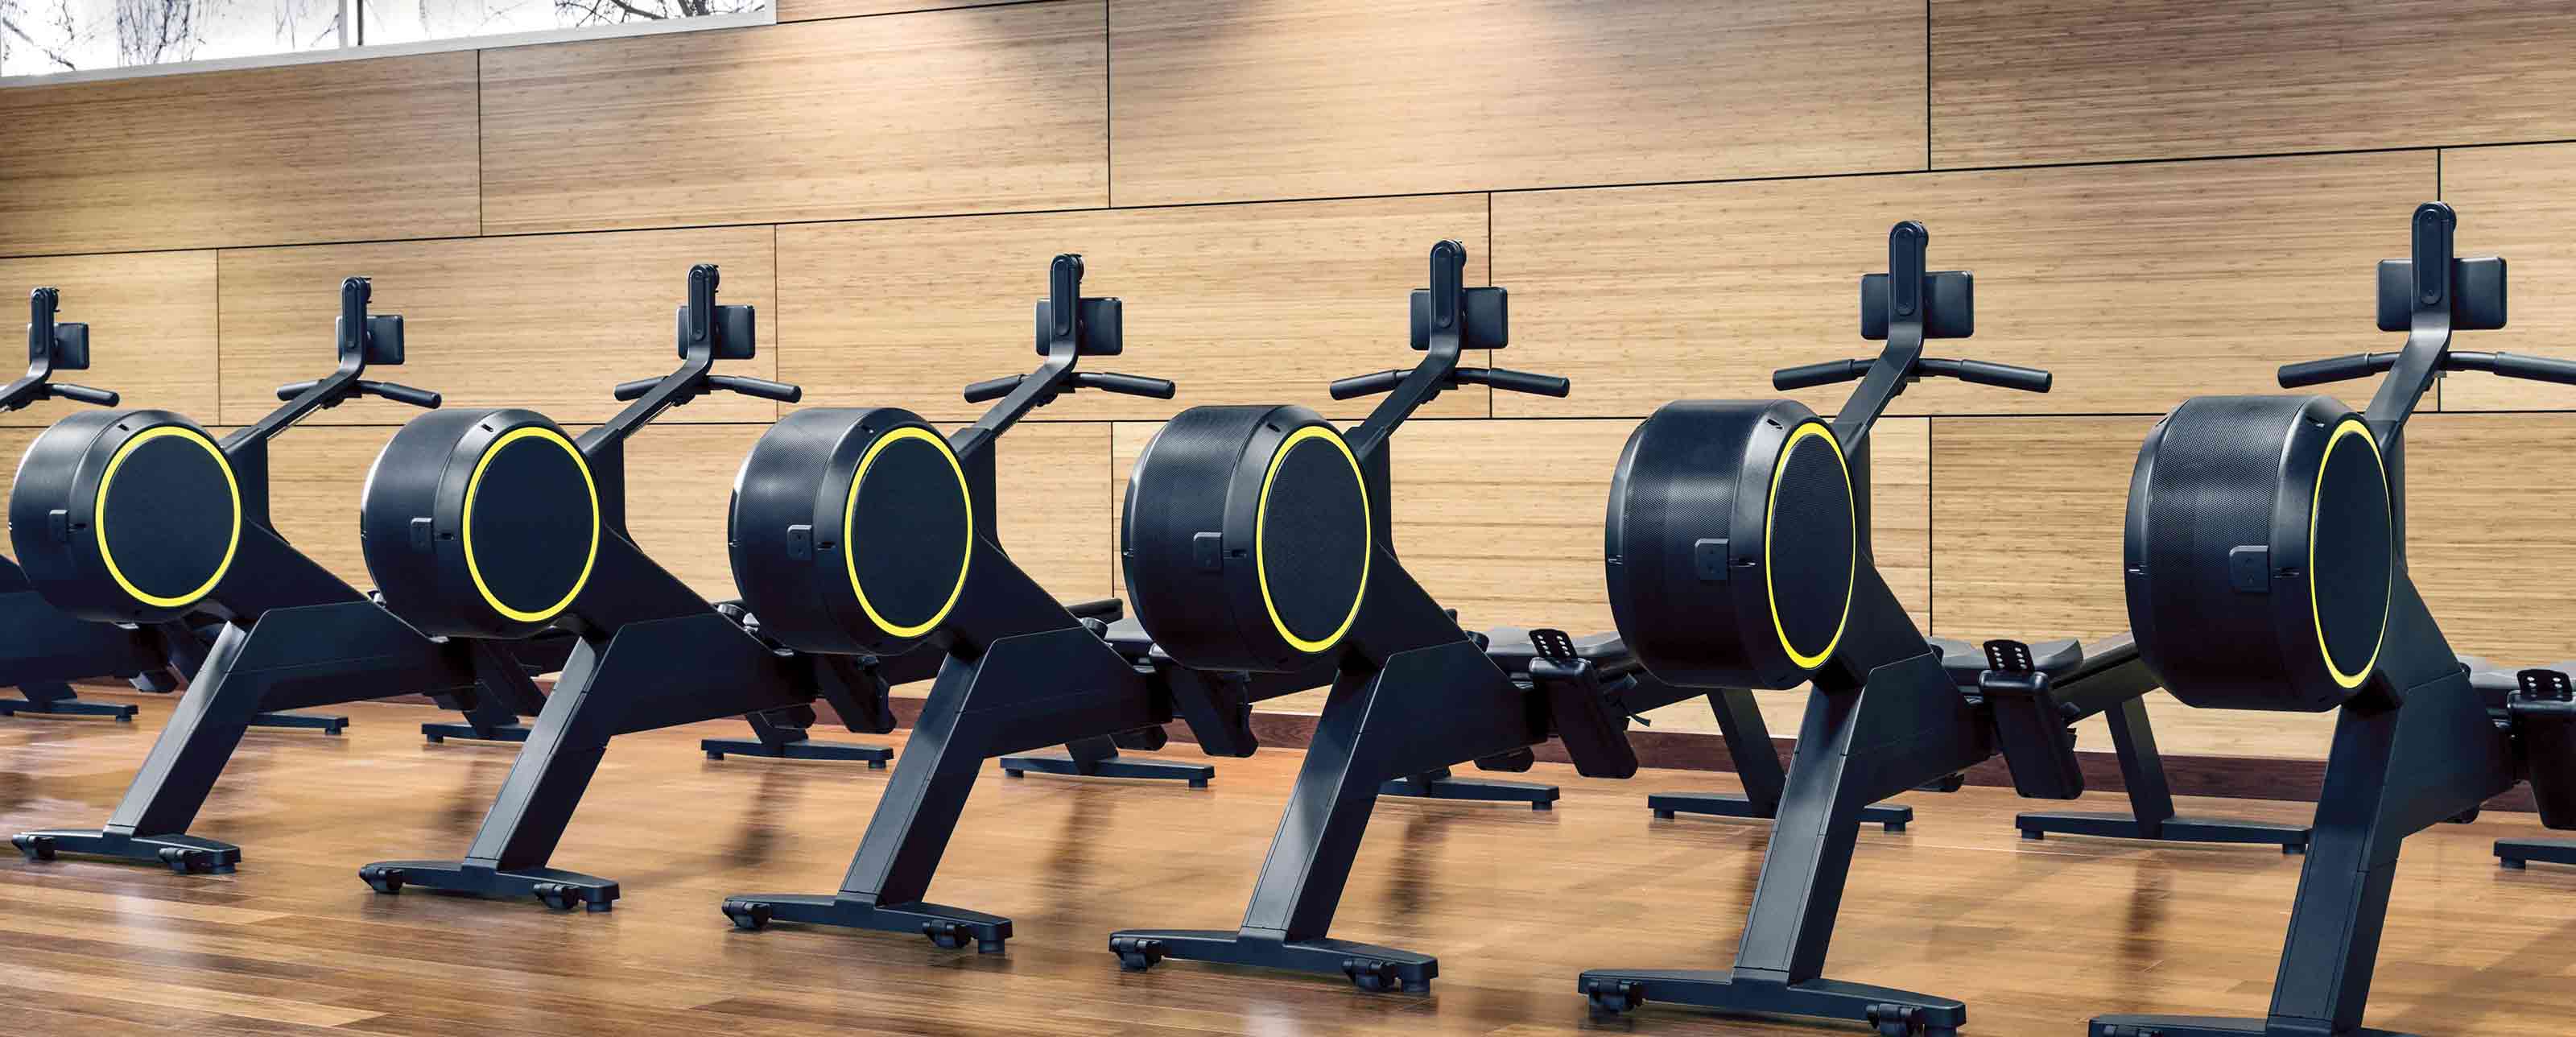 A row of rowing machines